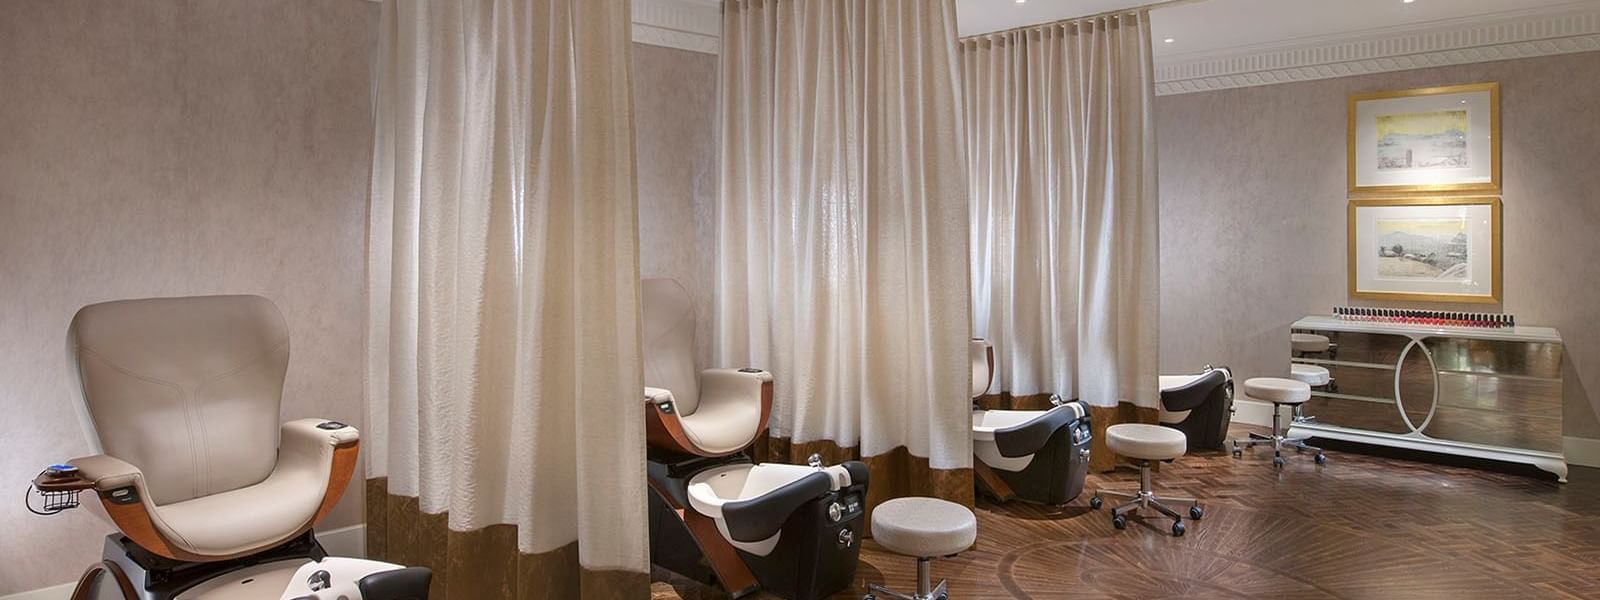 Pedicures chairs in Crown Spa Salon at Crown Hotel Melbourne